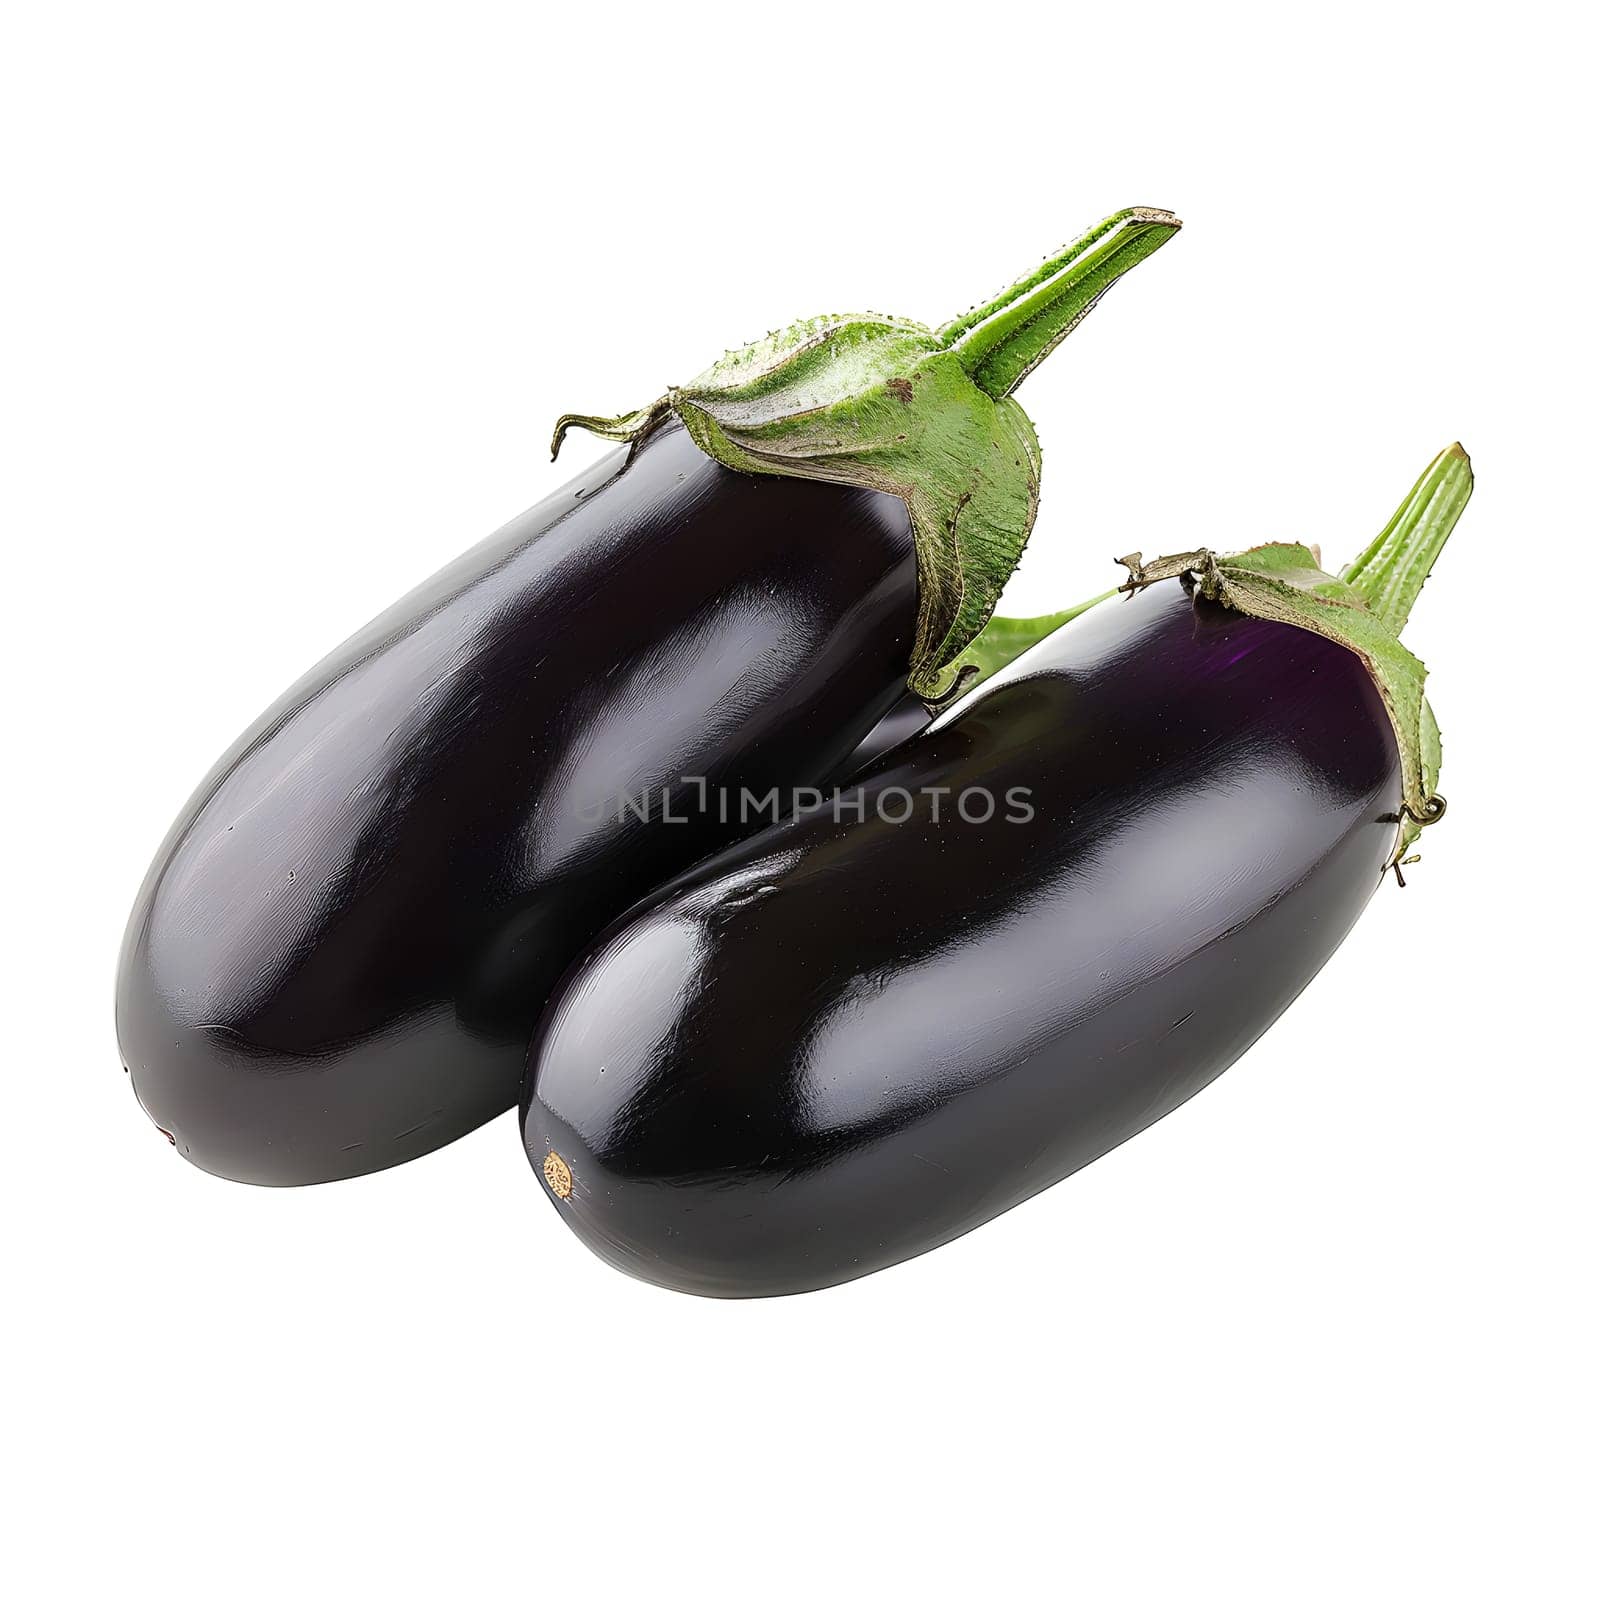 Two eggplants with green stems as natural foods in the nightshade family by Nadtochiy